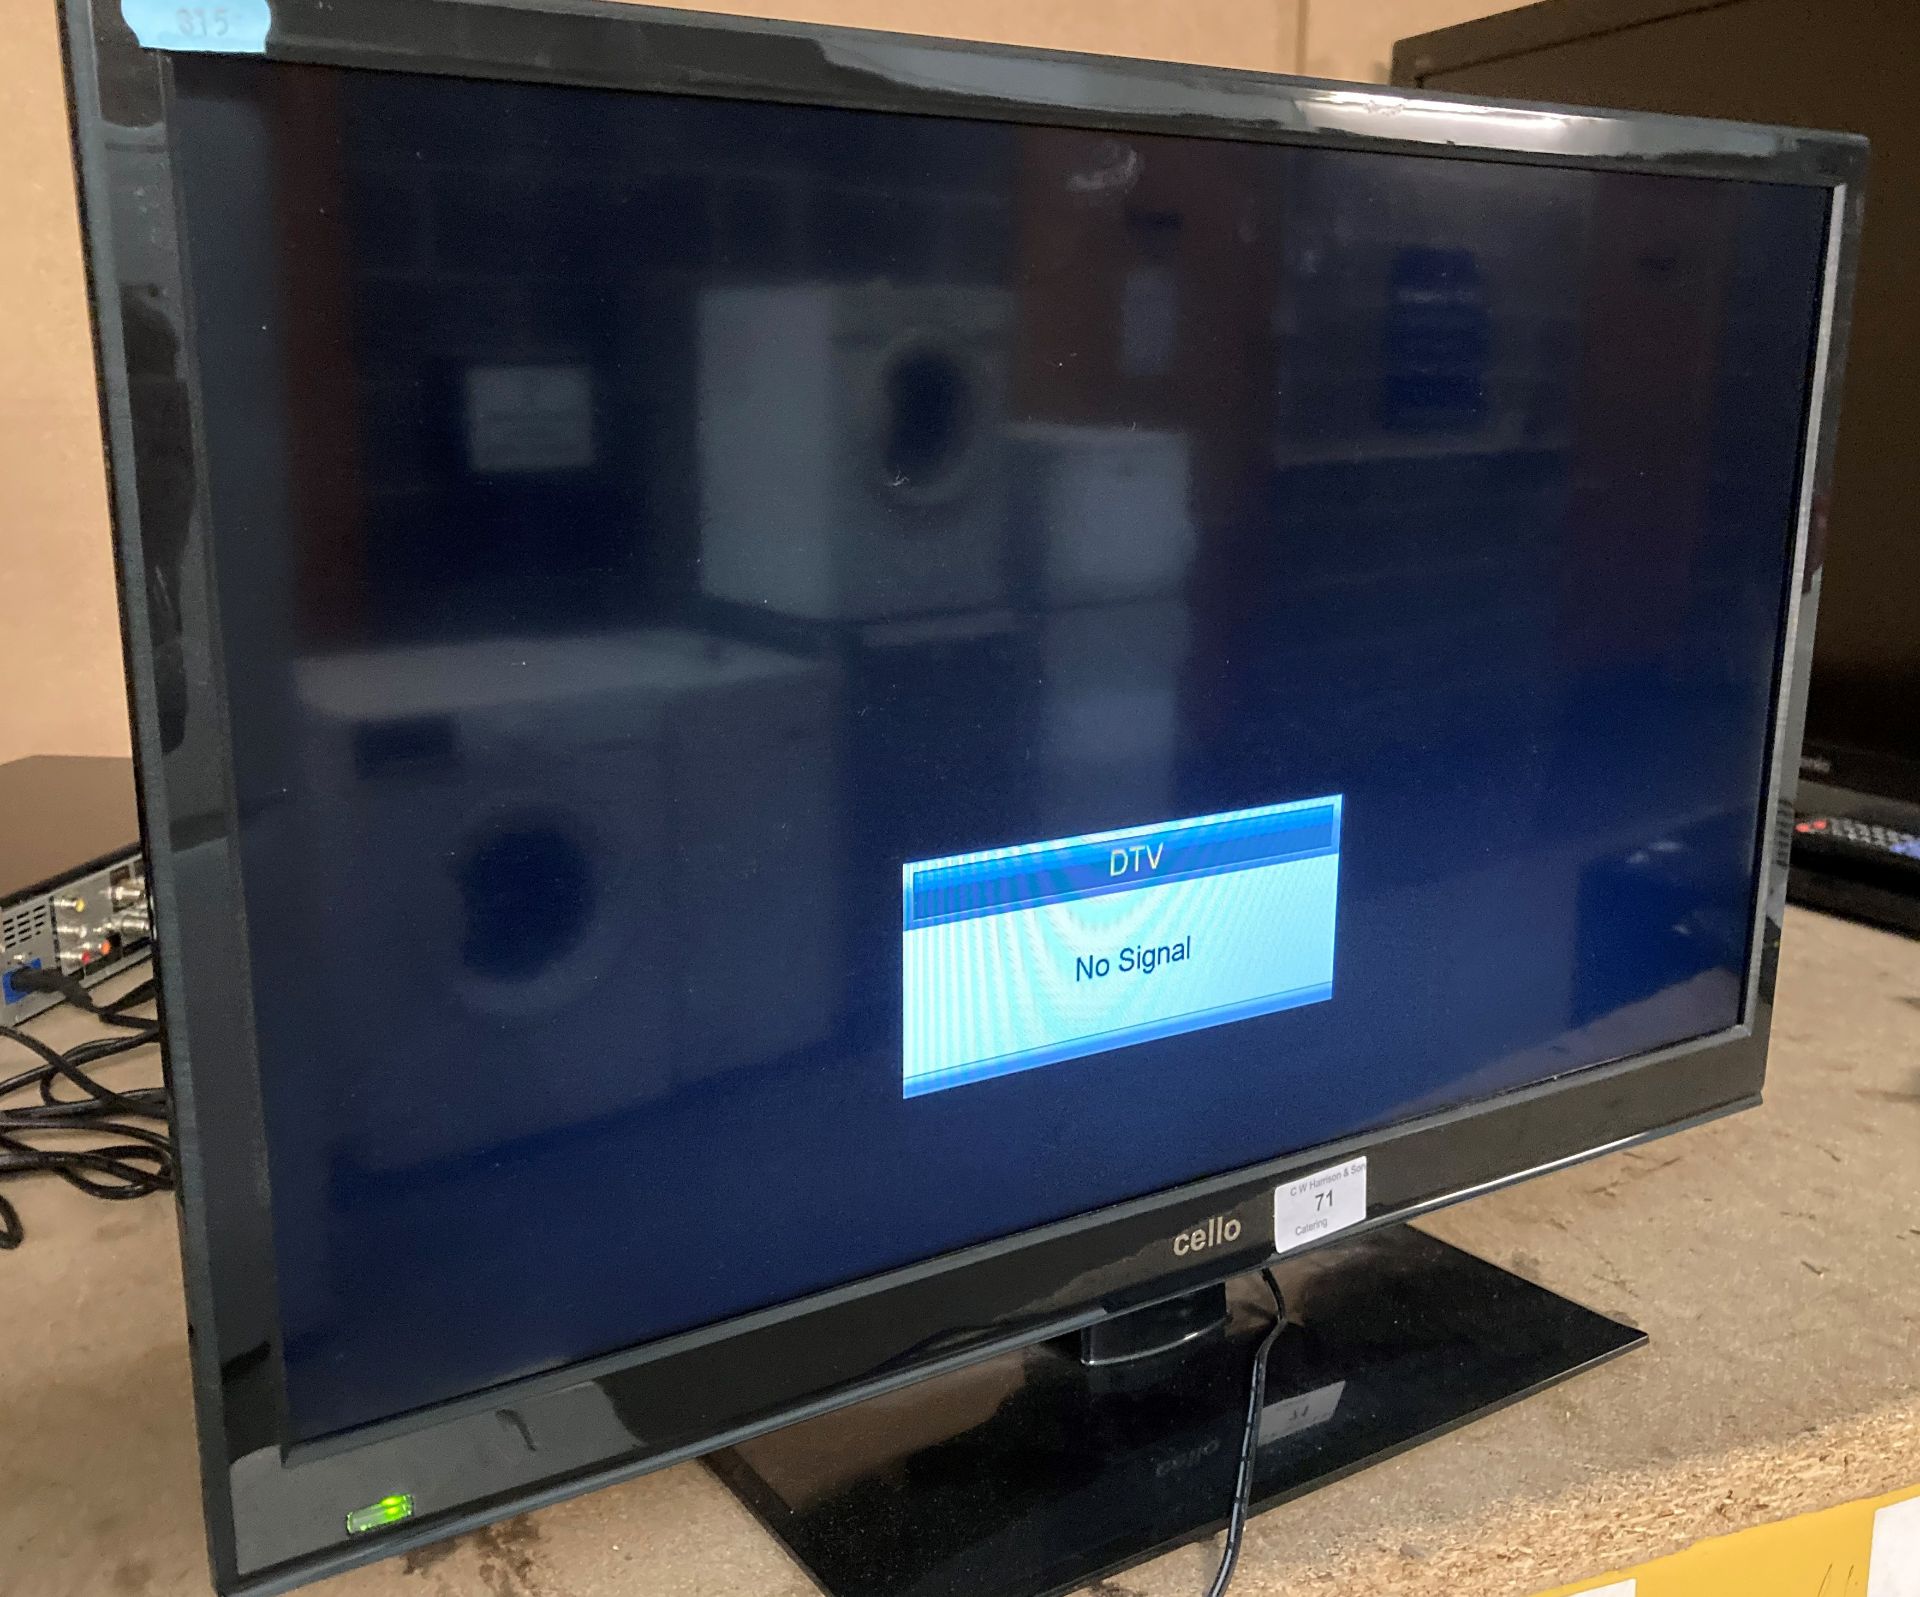 Cello 24" LED TV with DVD player model SNCB0816 (complete with remote)(saleroom location PO)